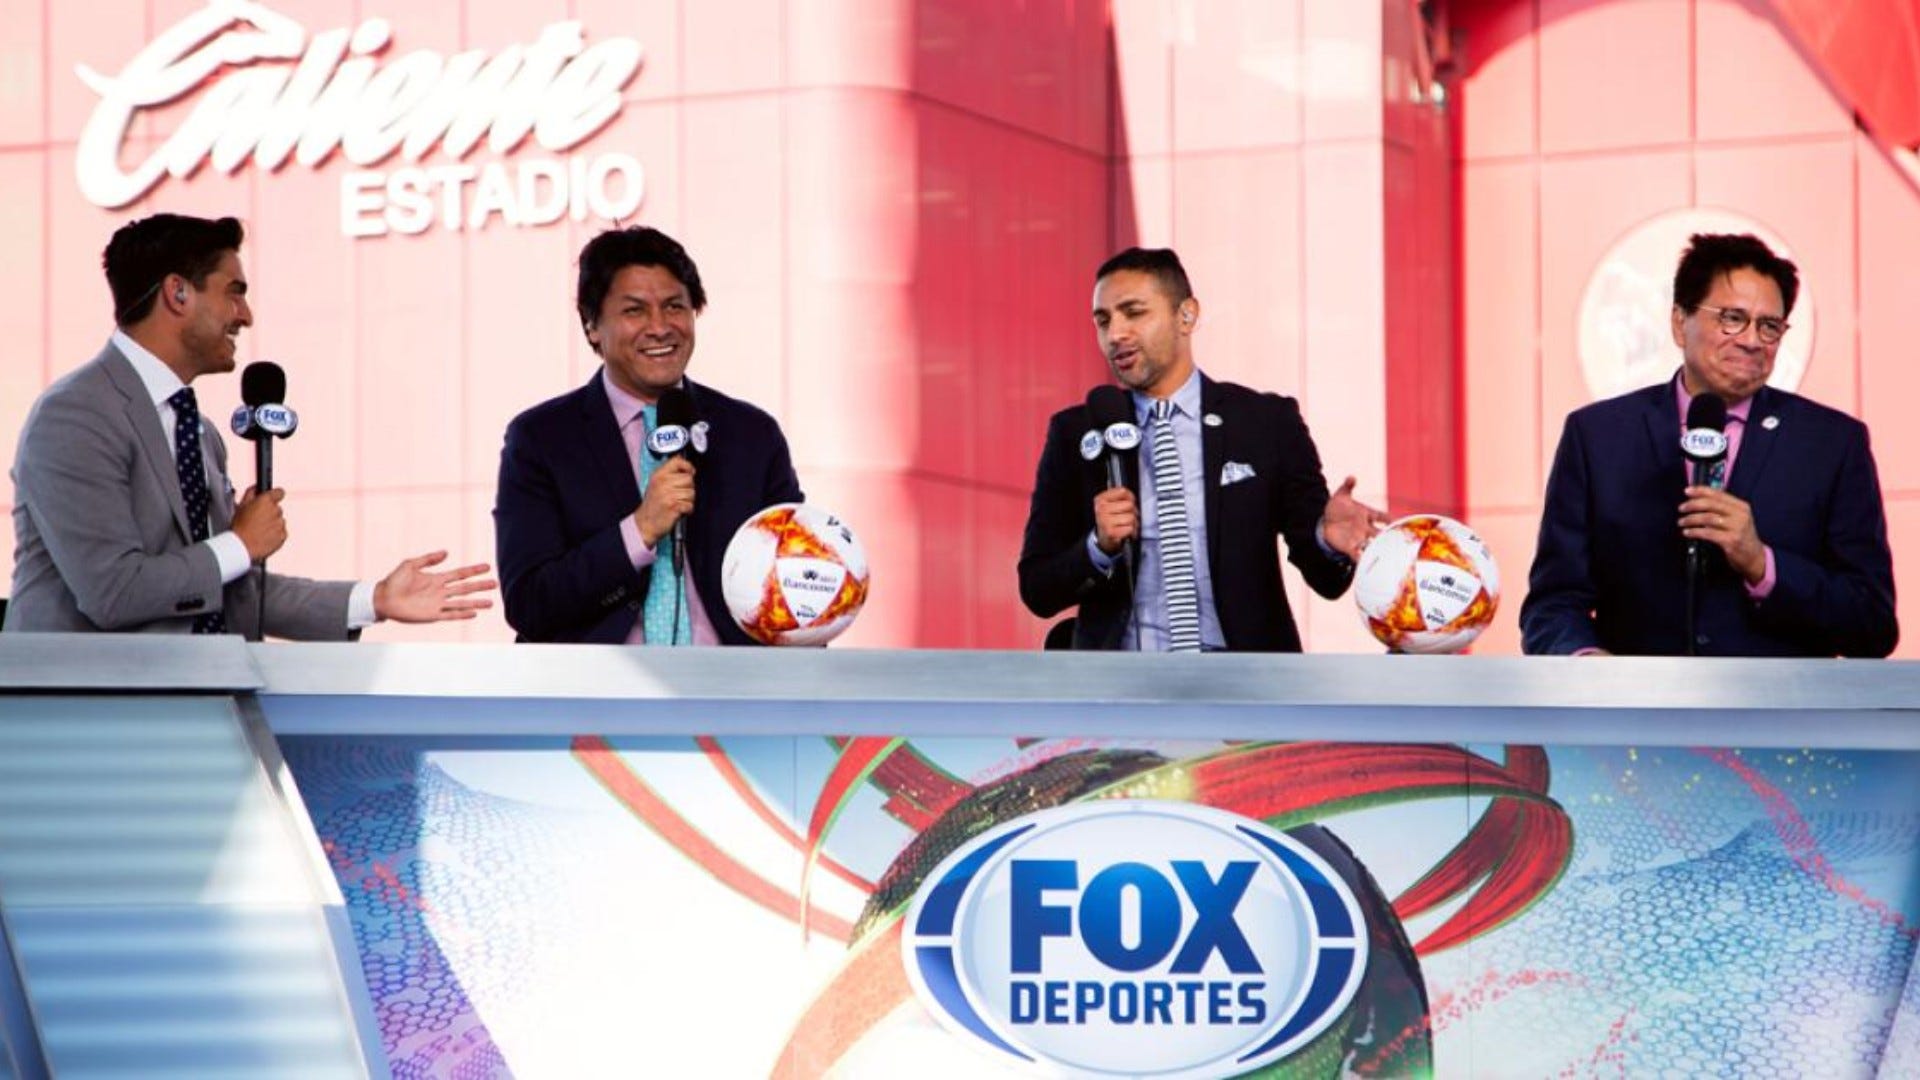 In the US: Where to watch Fox Deportes on TV and streaming?